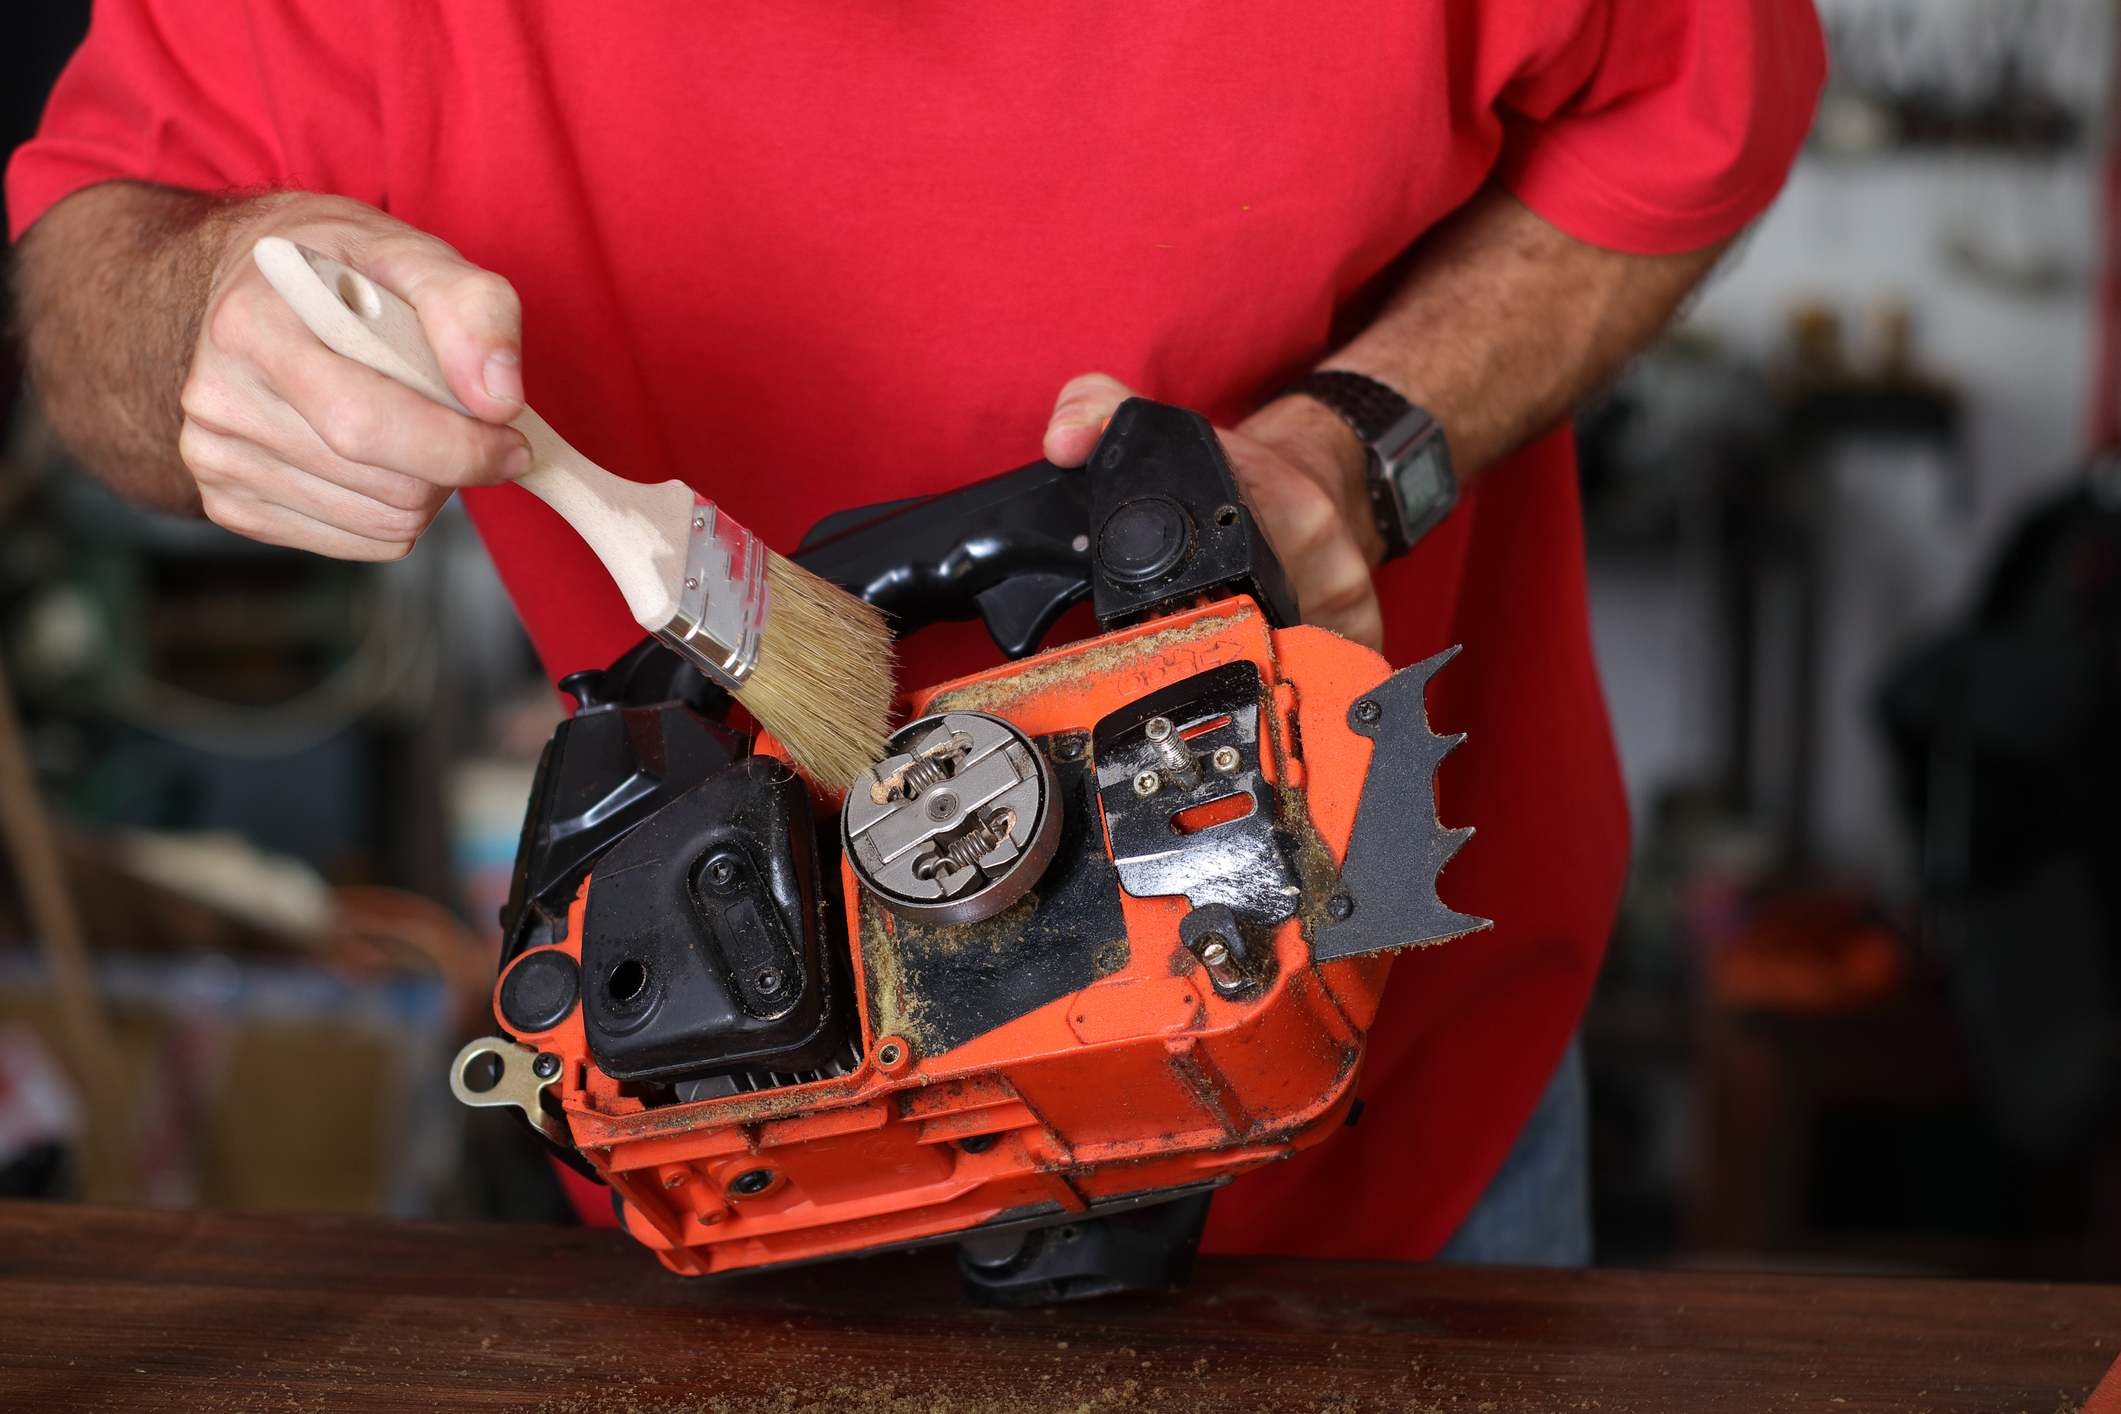 How To Start A Stubborn Chainsaw Why Is Rust Bad for Your Chainsaw? How To Clean Chainsaw Rust